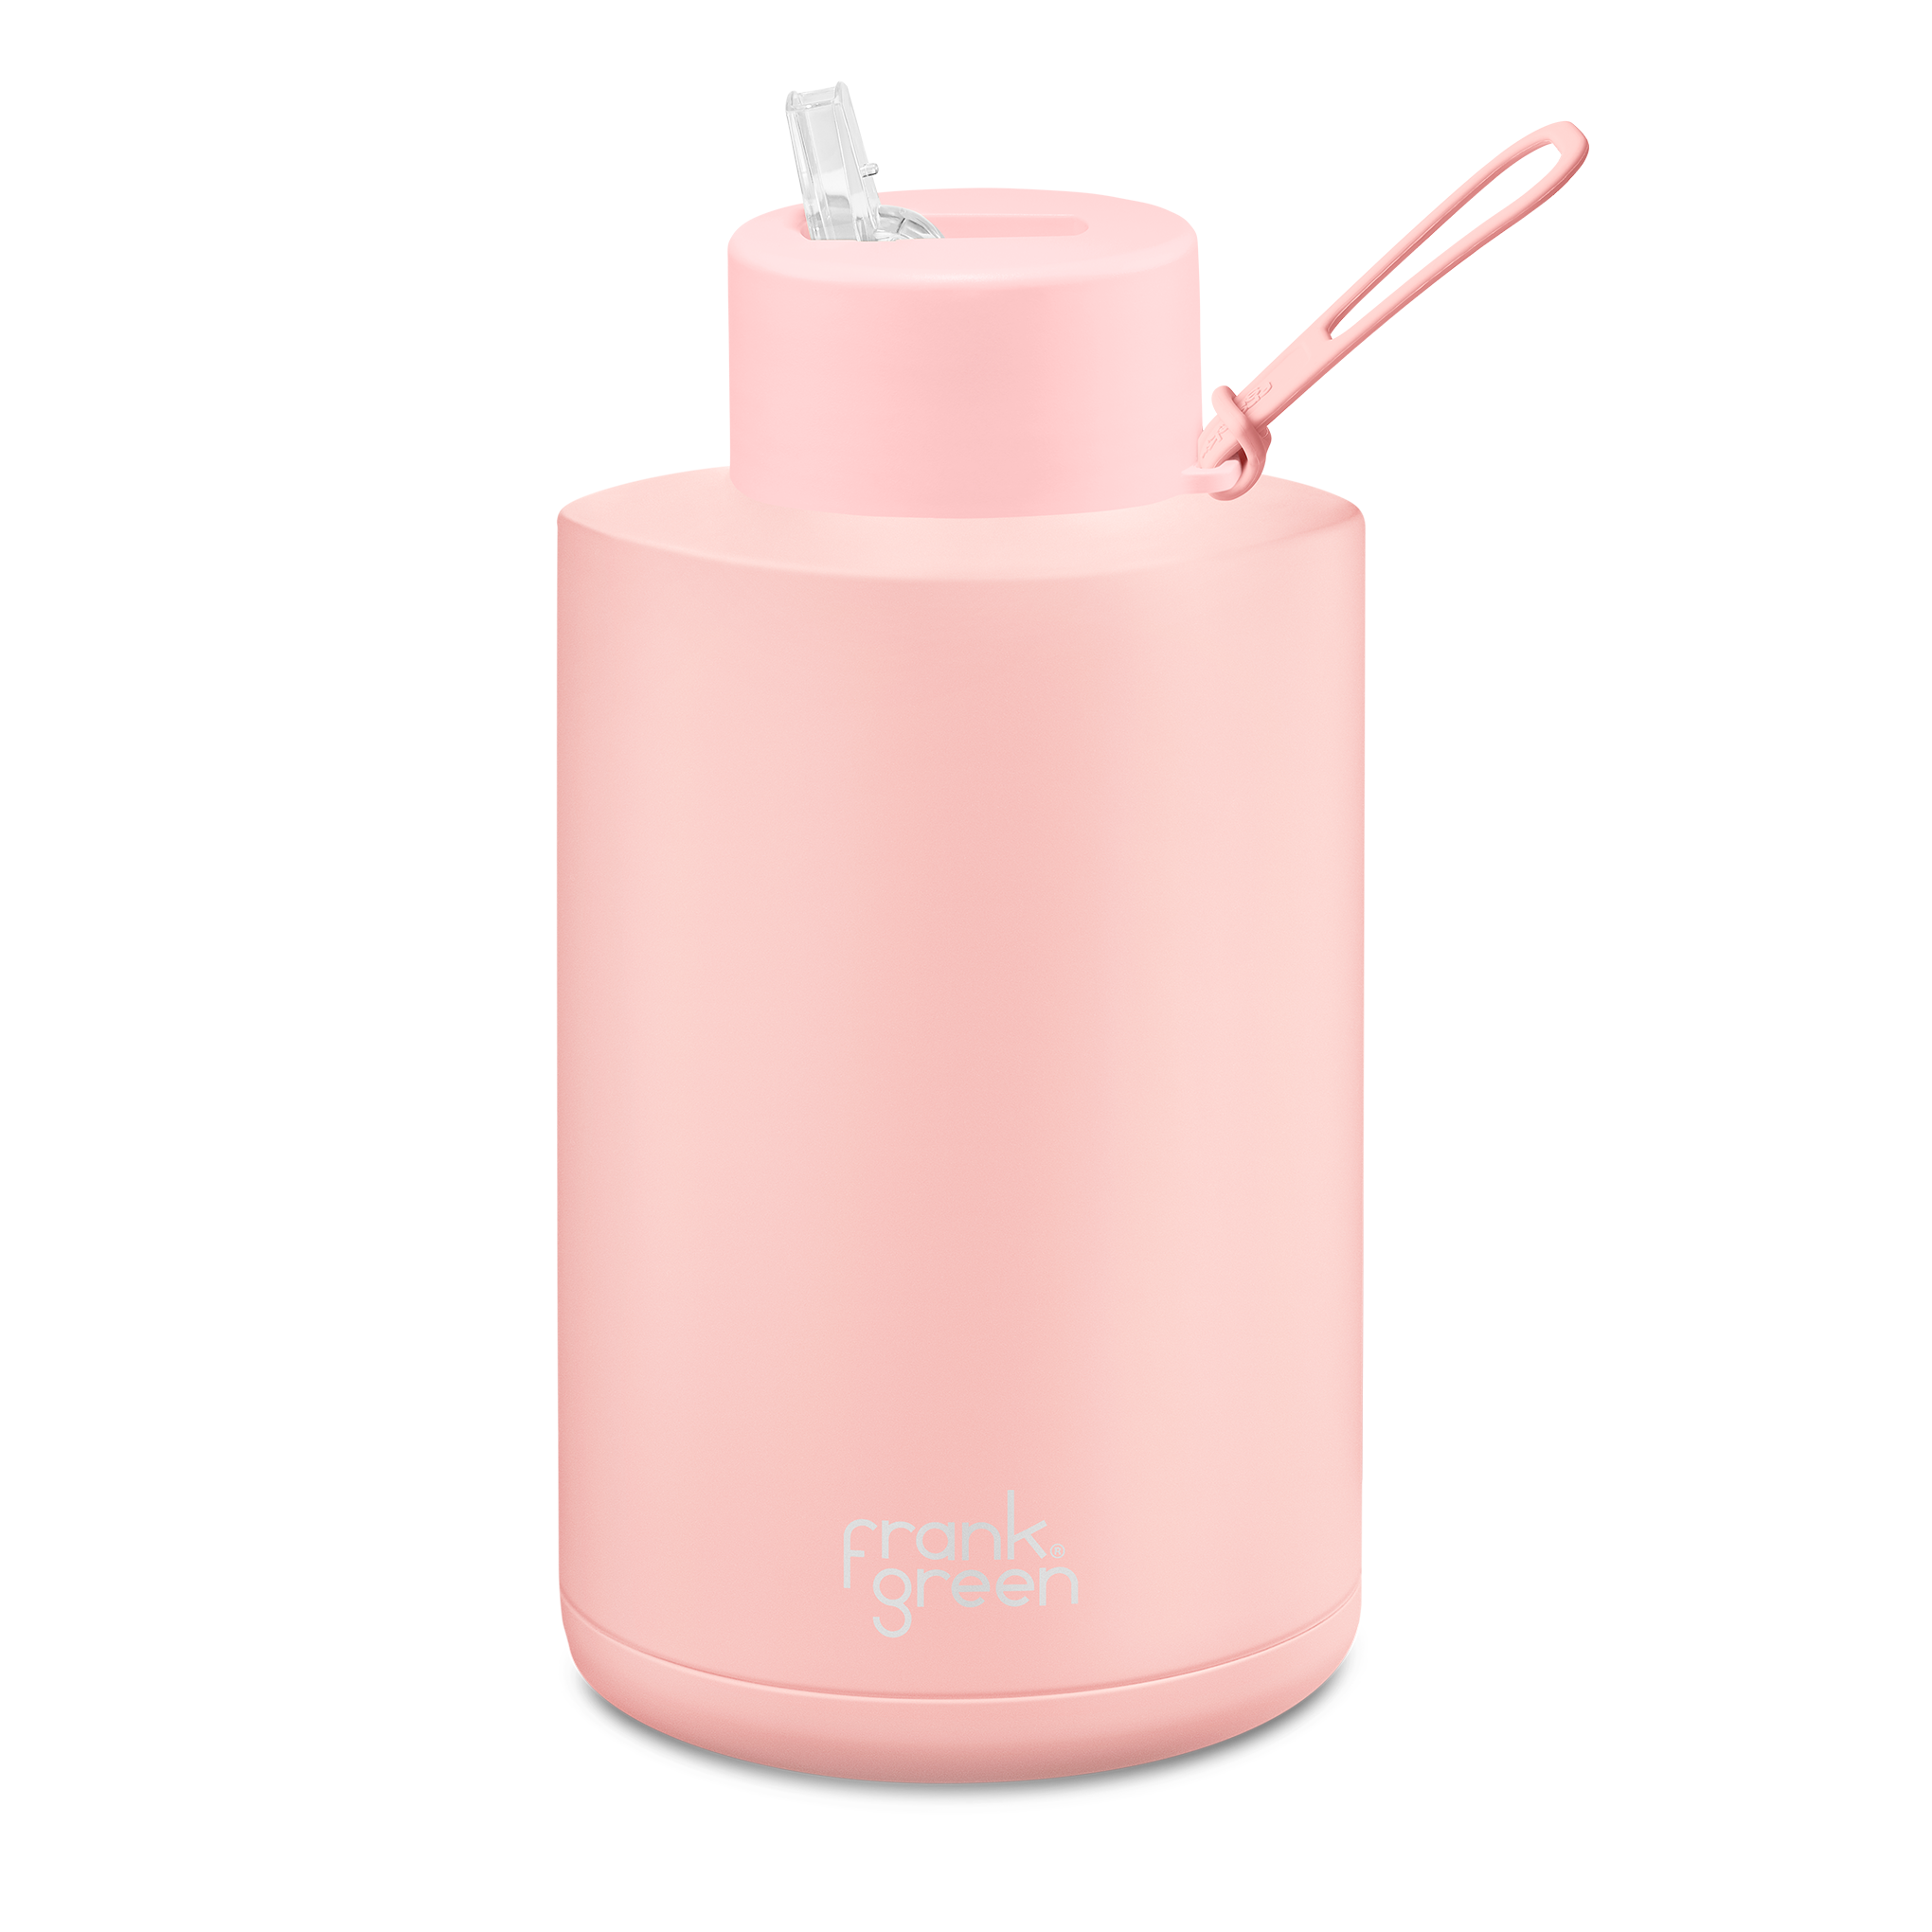  frank green Ceramic Reusable Bottle with Straw Lid